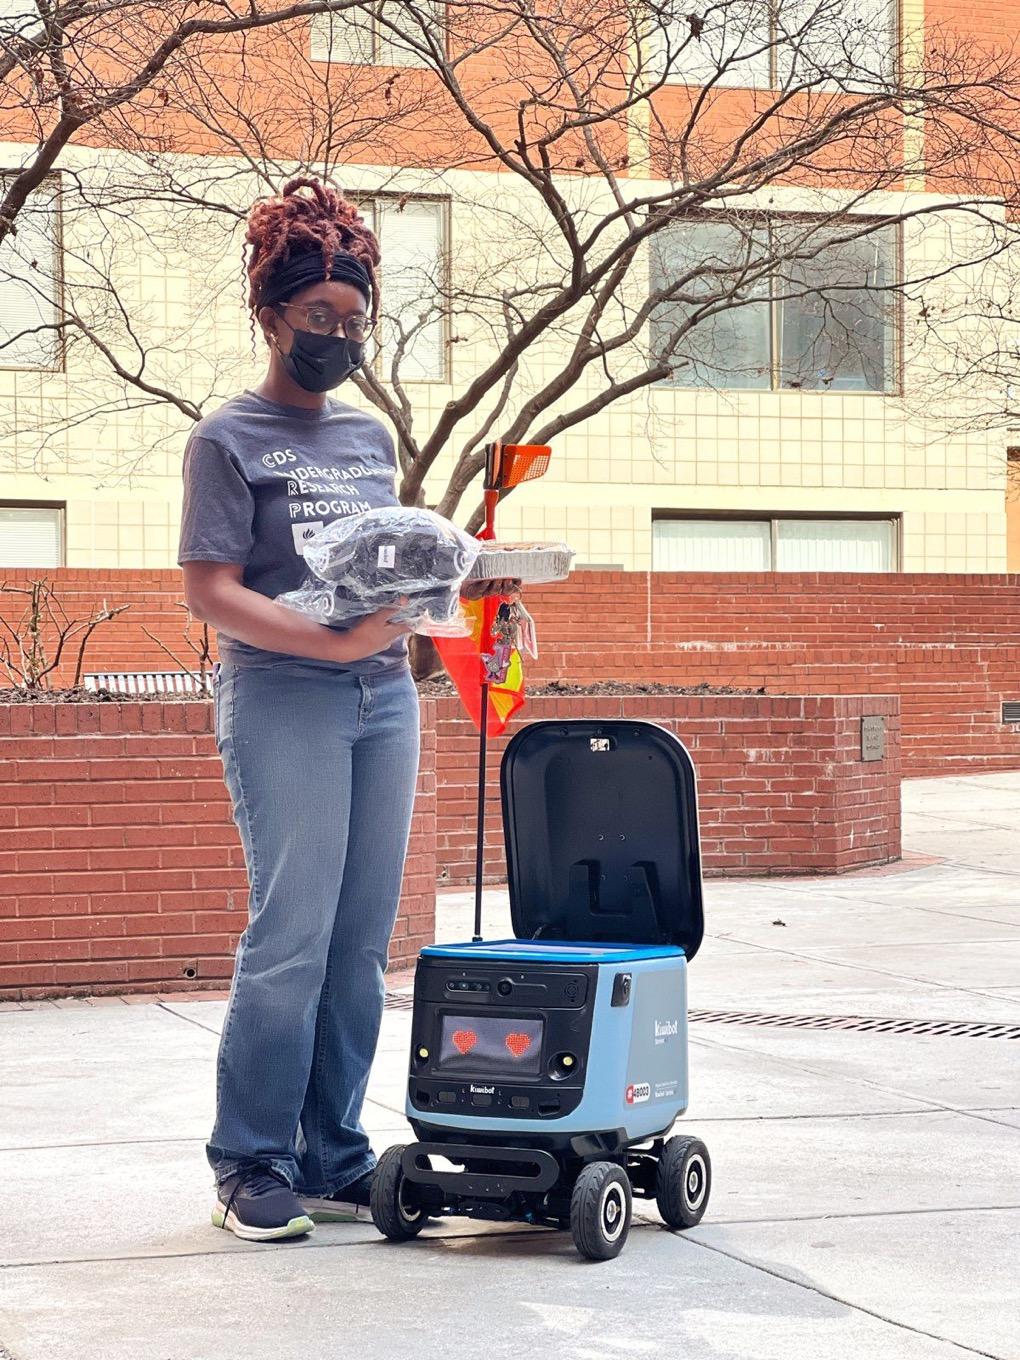 A student stands with a kiwibot